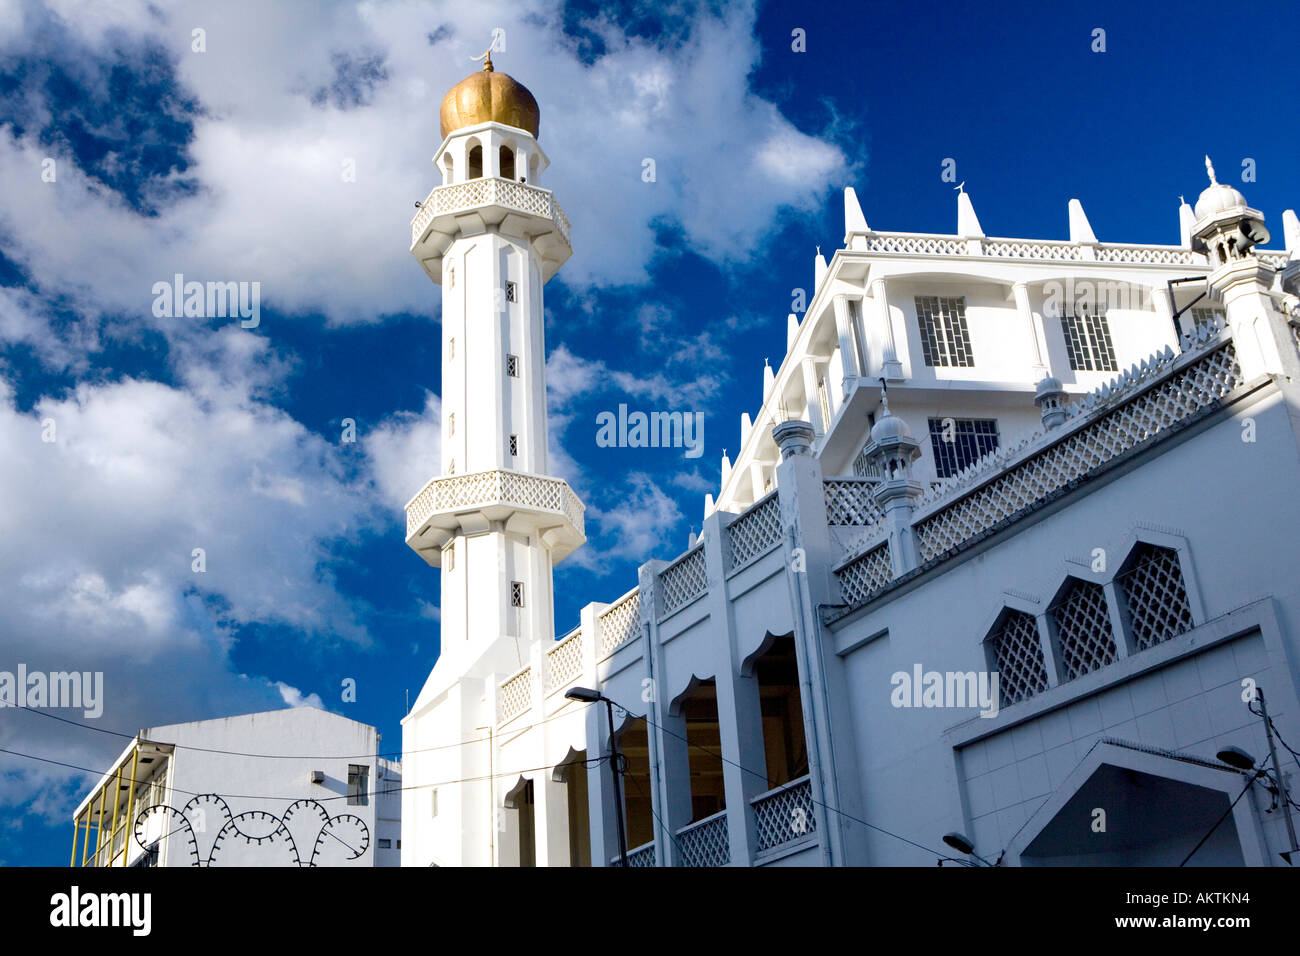 Magnificent Mosque with golden domed minaret in late afternoon sunlight - 'Port Louis', 'Mauritius' Stock Photo